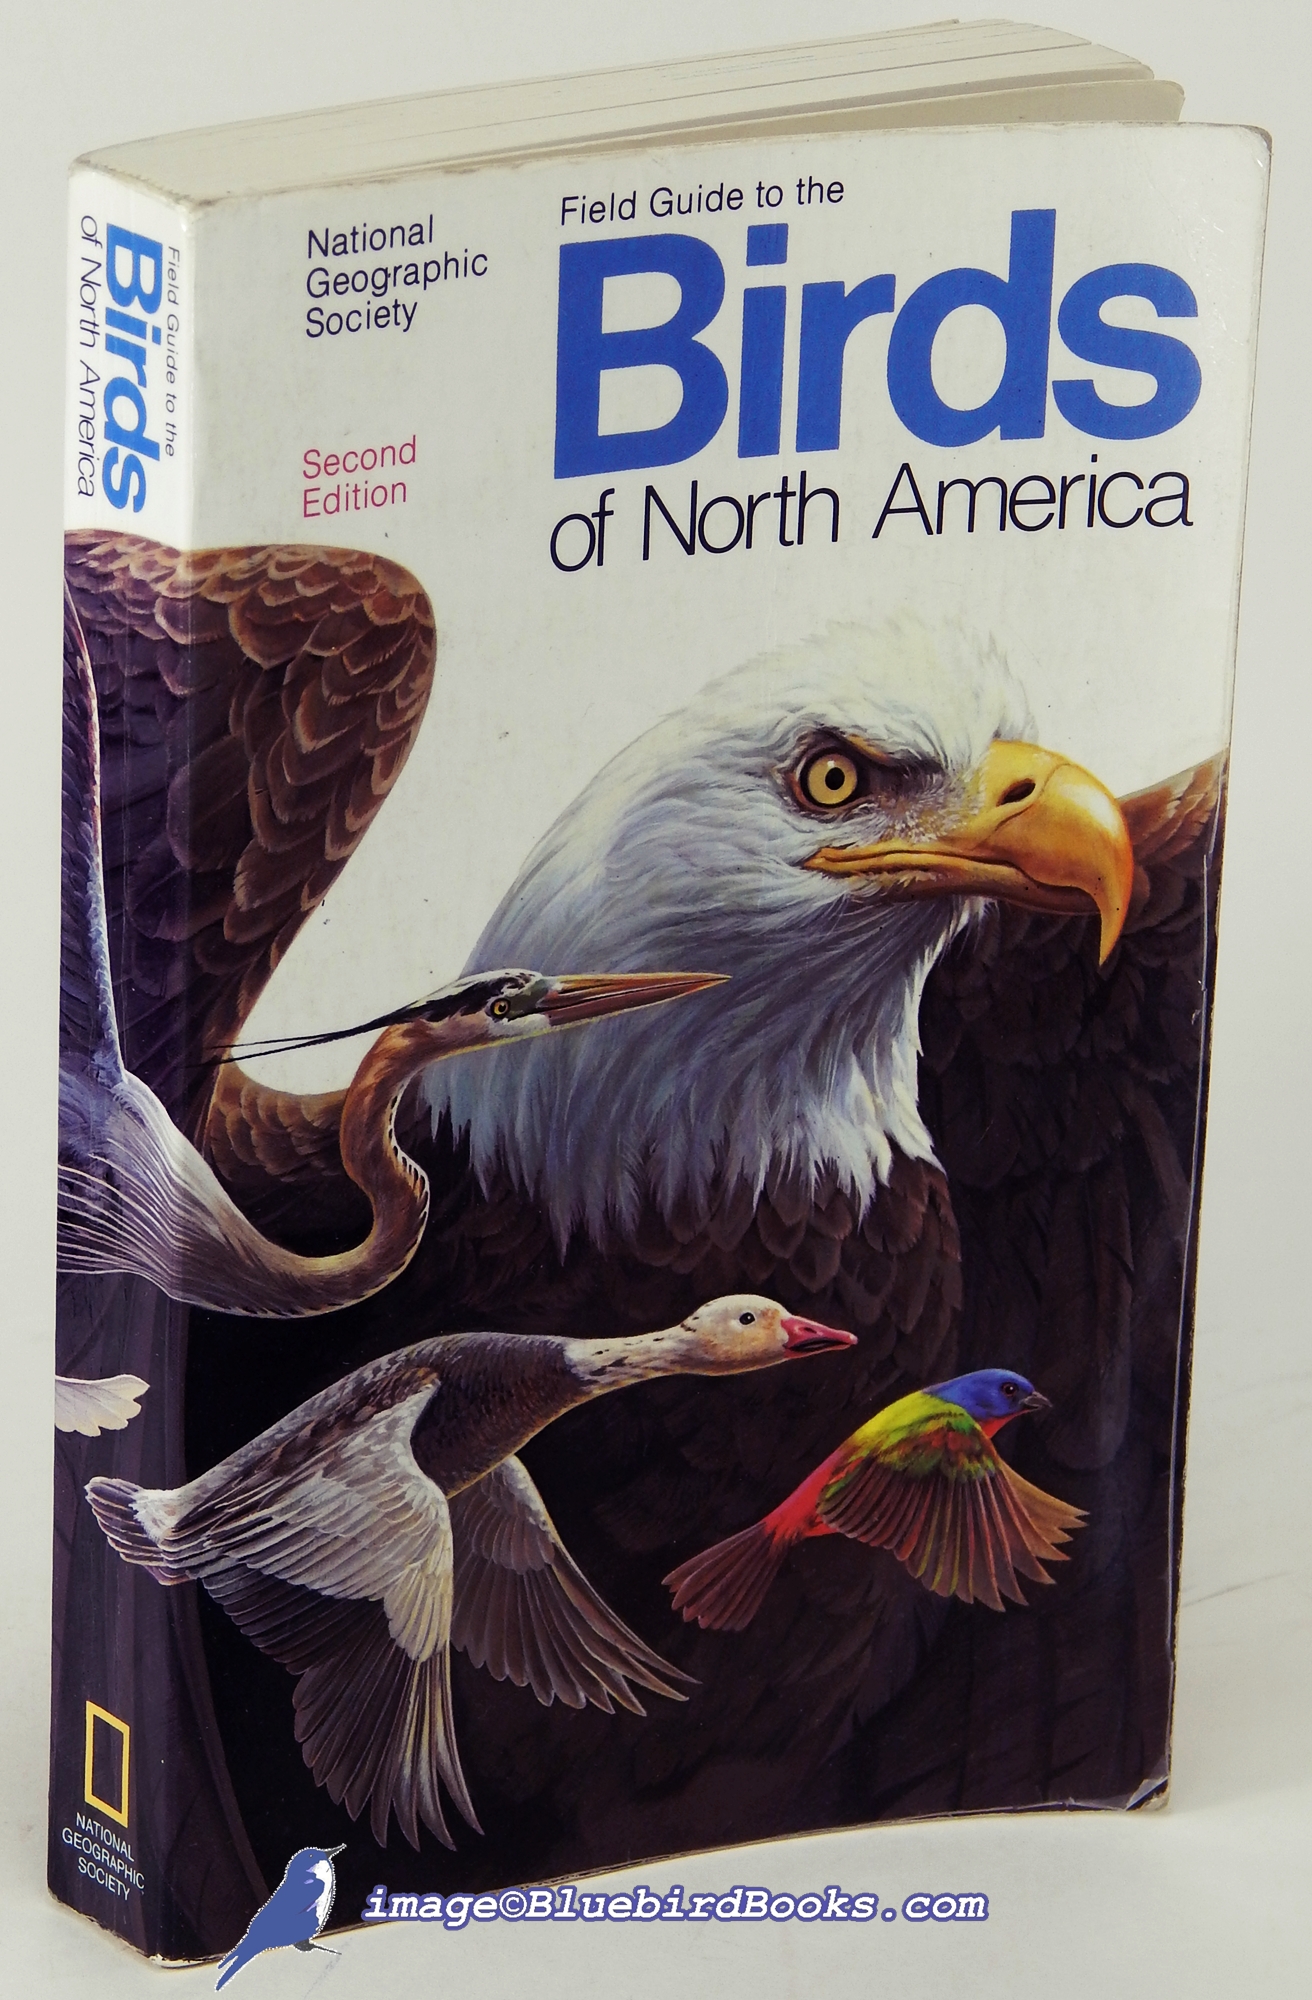 SCOTT, SHIRLEY L. (EDITOR) - National Geographic Society Field Guide to the Birds of North America, Second Edition